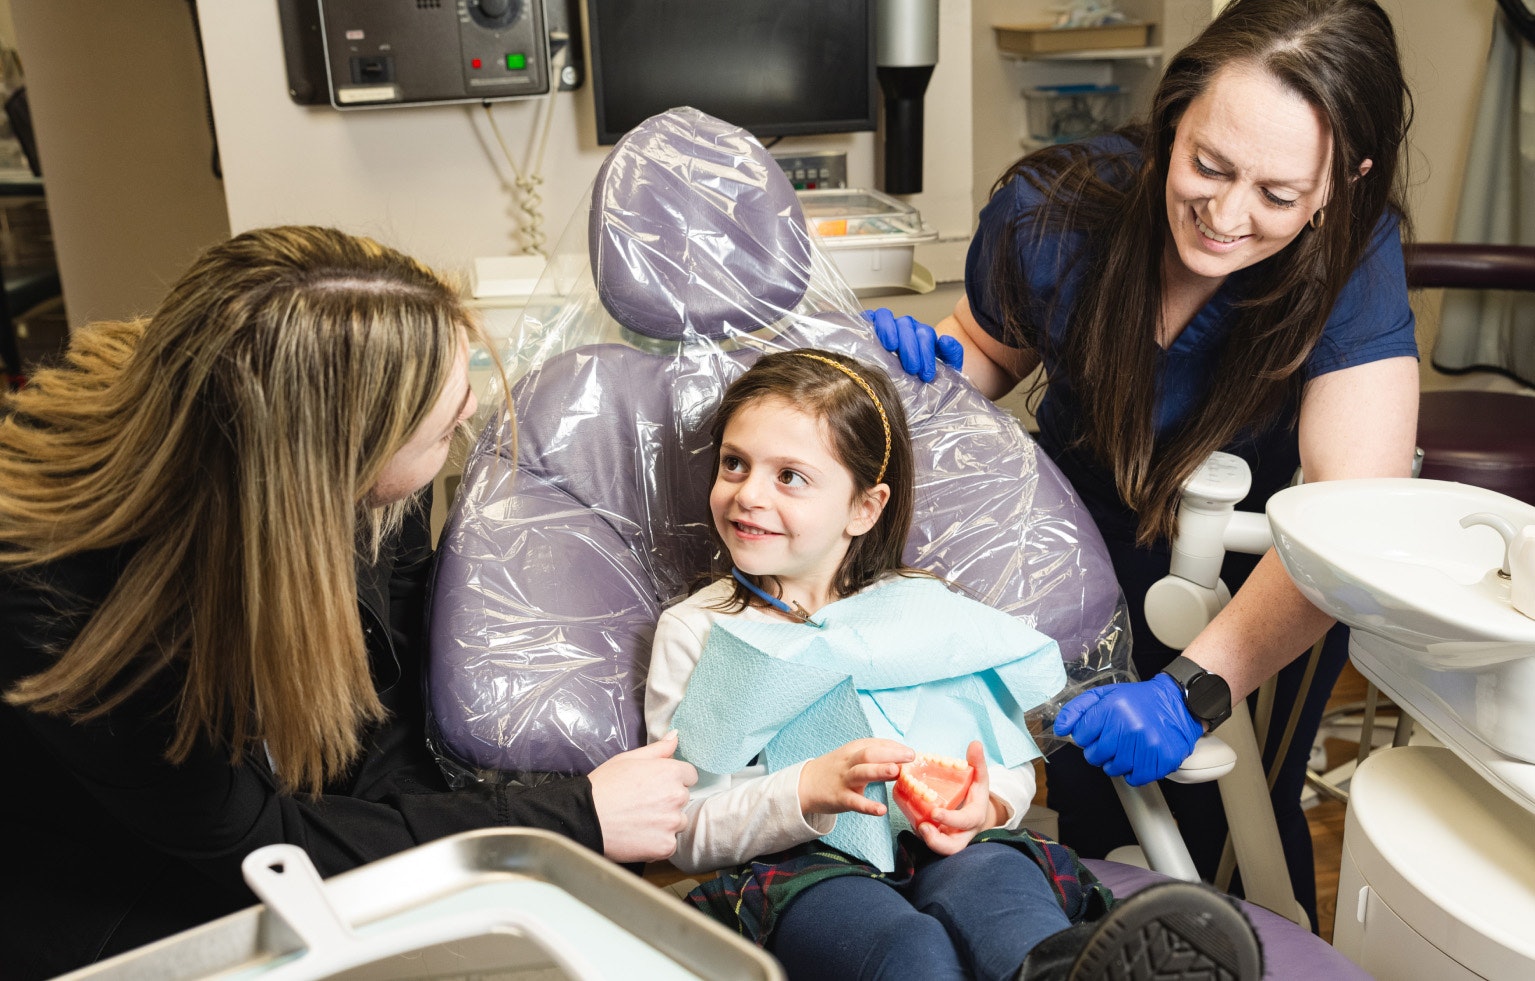 A child in a dental chair being attended to by two dental assistants